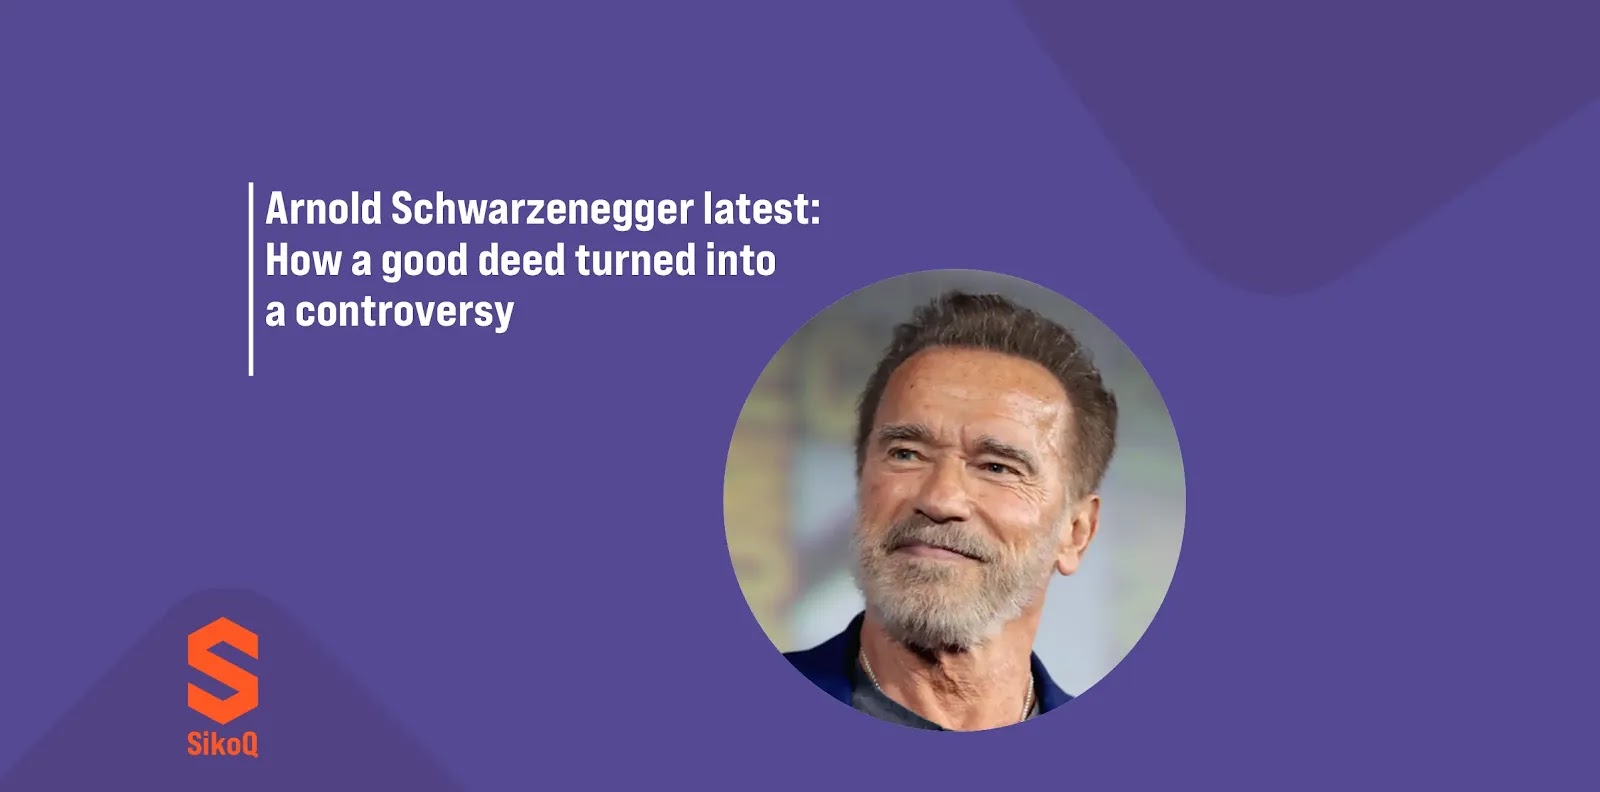 Arnold Schwarzenegger latest: How a good deed turned into a controversy